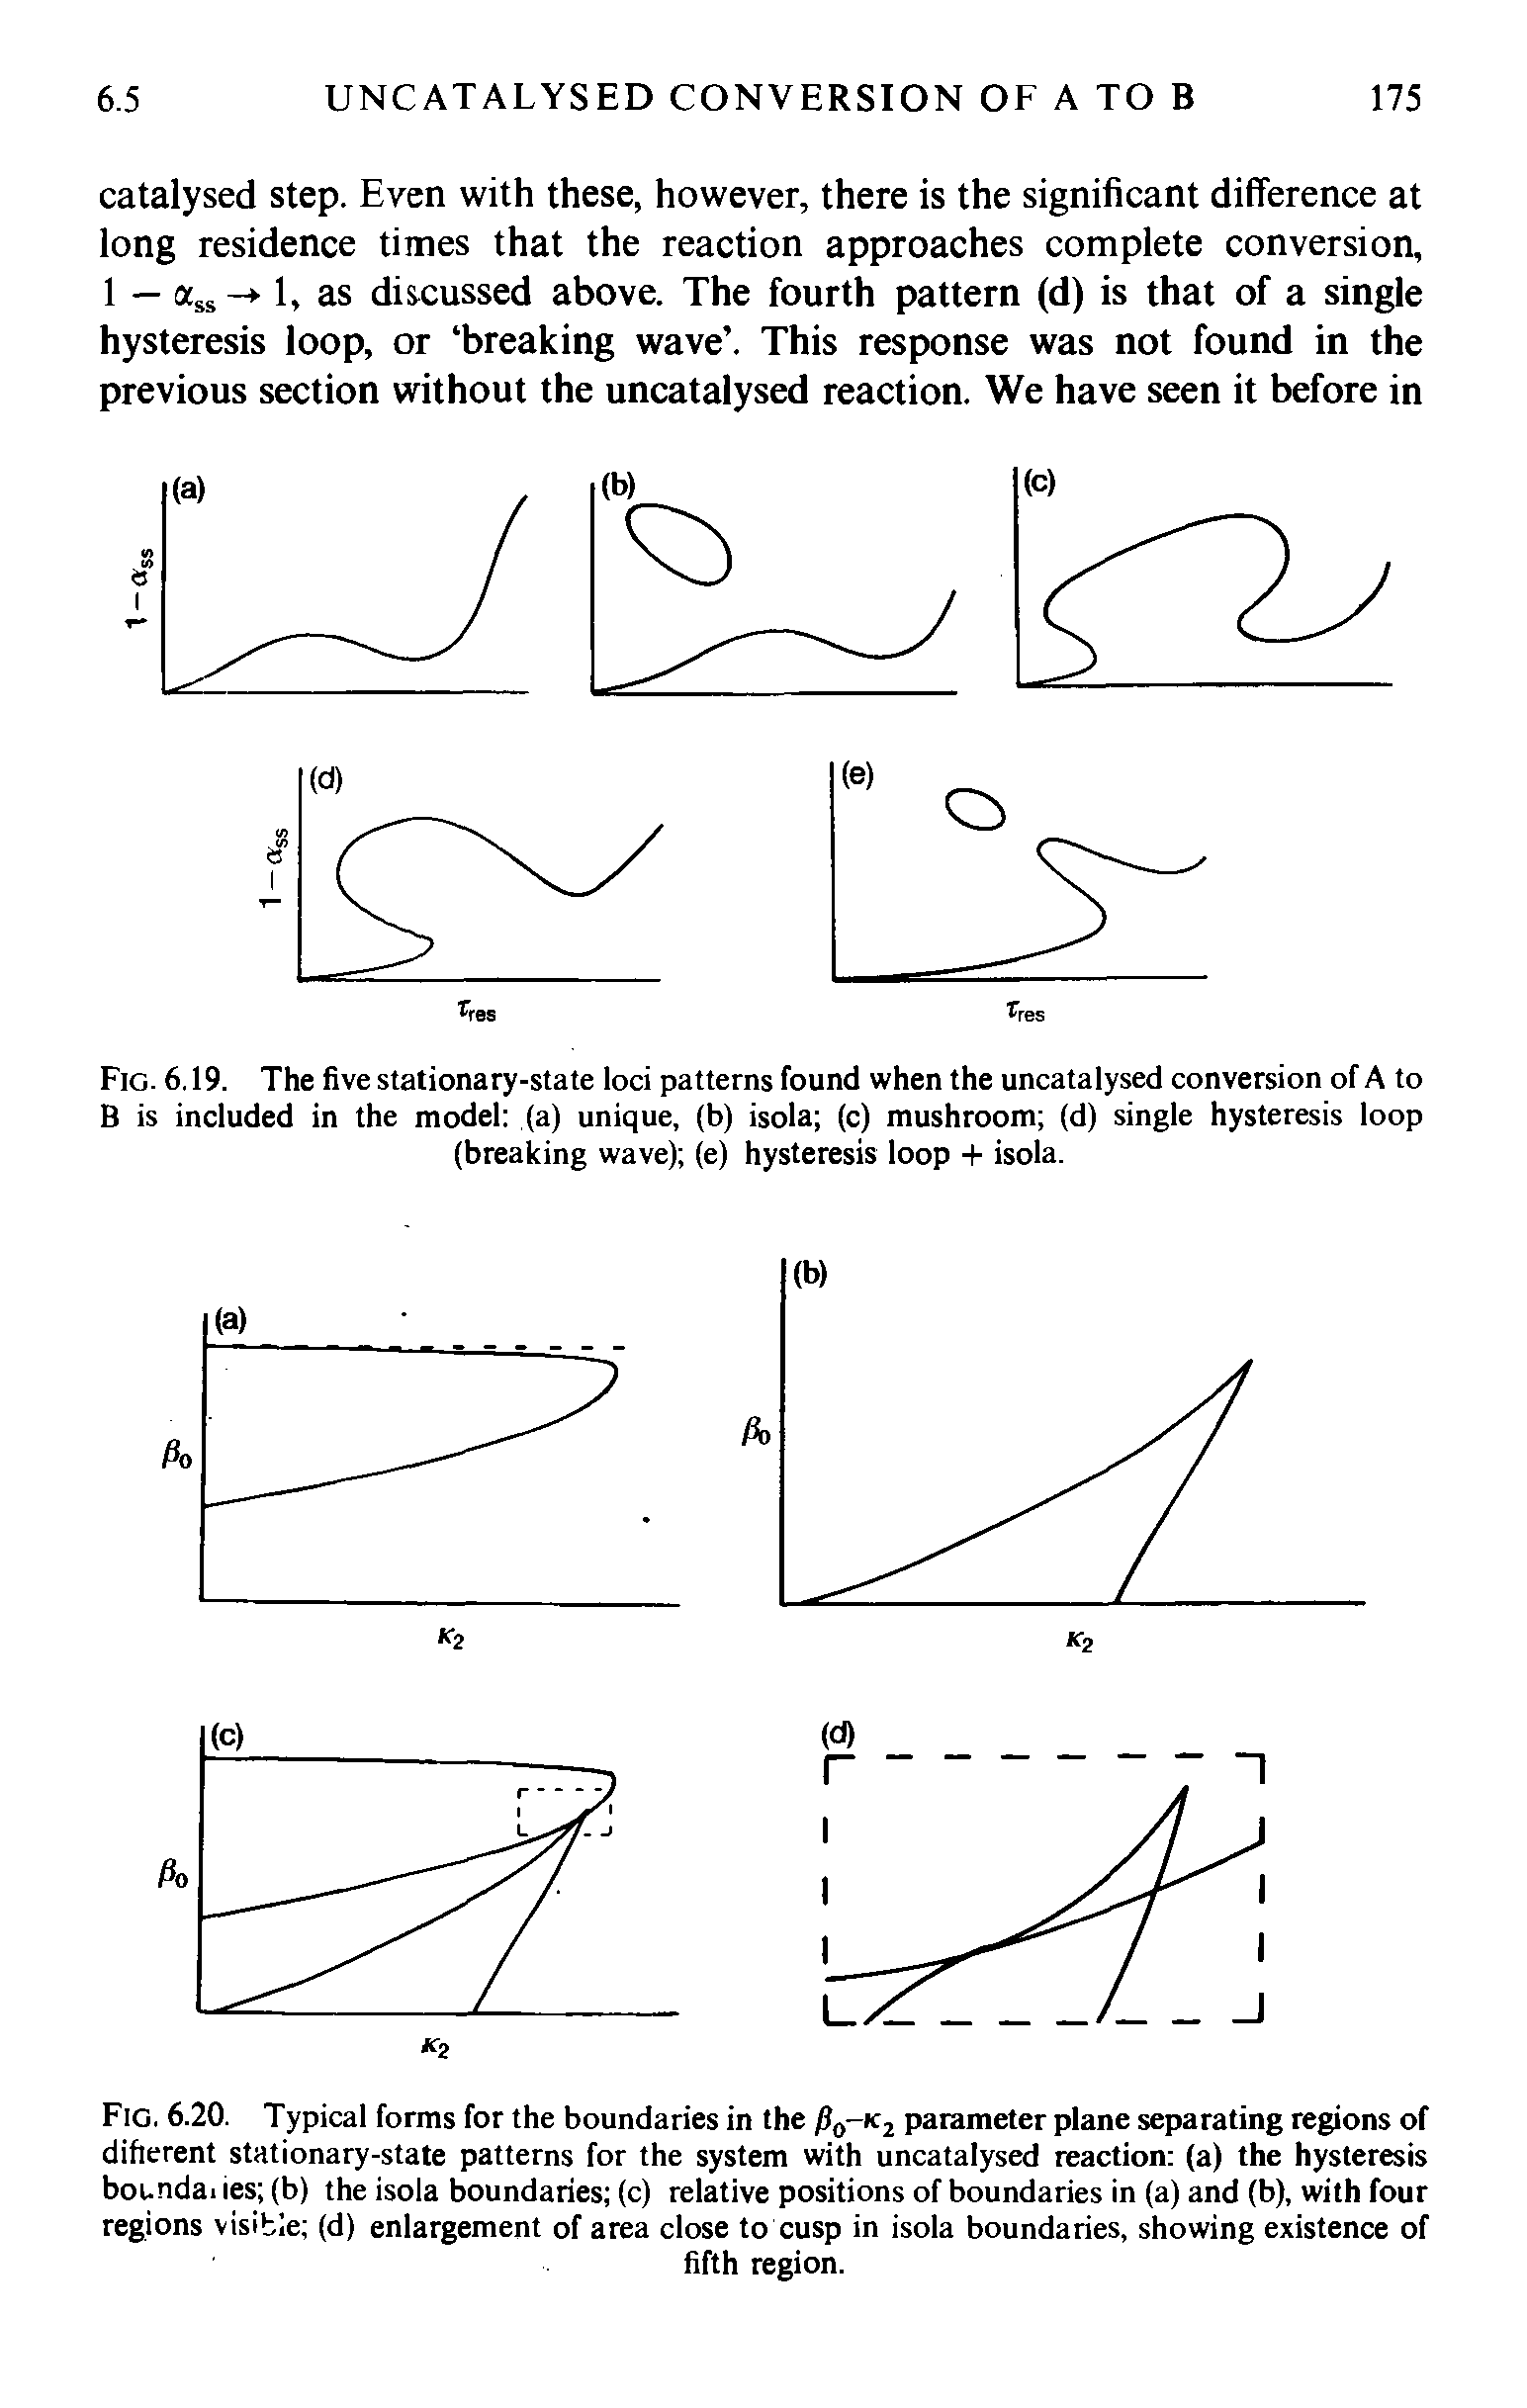 Fig. 6.19. The five stationary-state loci patterns found when the uncatalysed conversion of A to B is included in the model (a) unique, (b) isola (c) mushroom (d) single hysteresis loop (breaking wave) (e) hysteresis loop + isola.